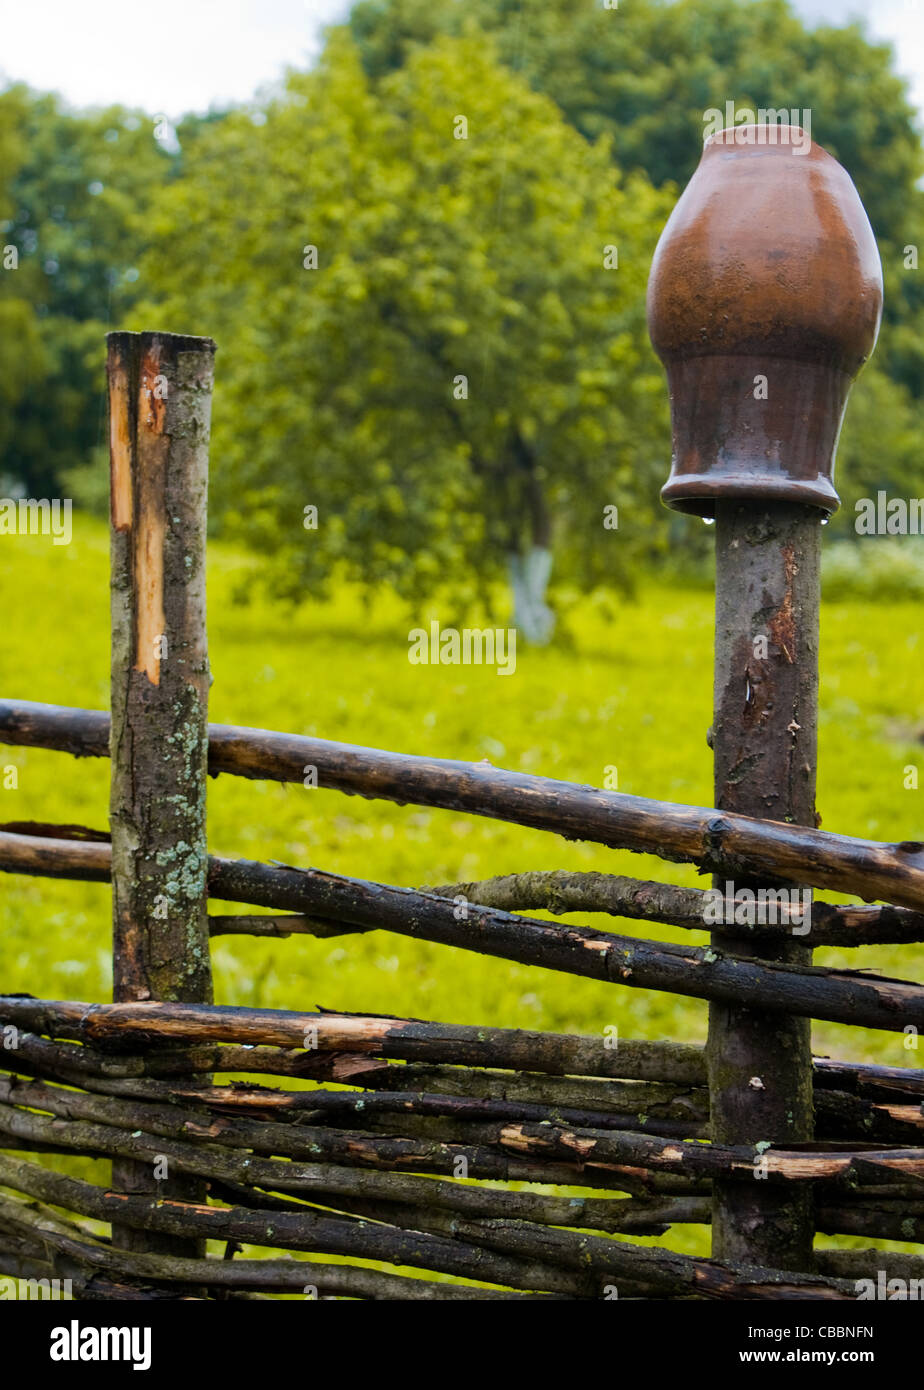 pot on wooden farm fence with grass and tree in background Stock Photo -  Alamy